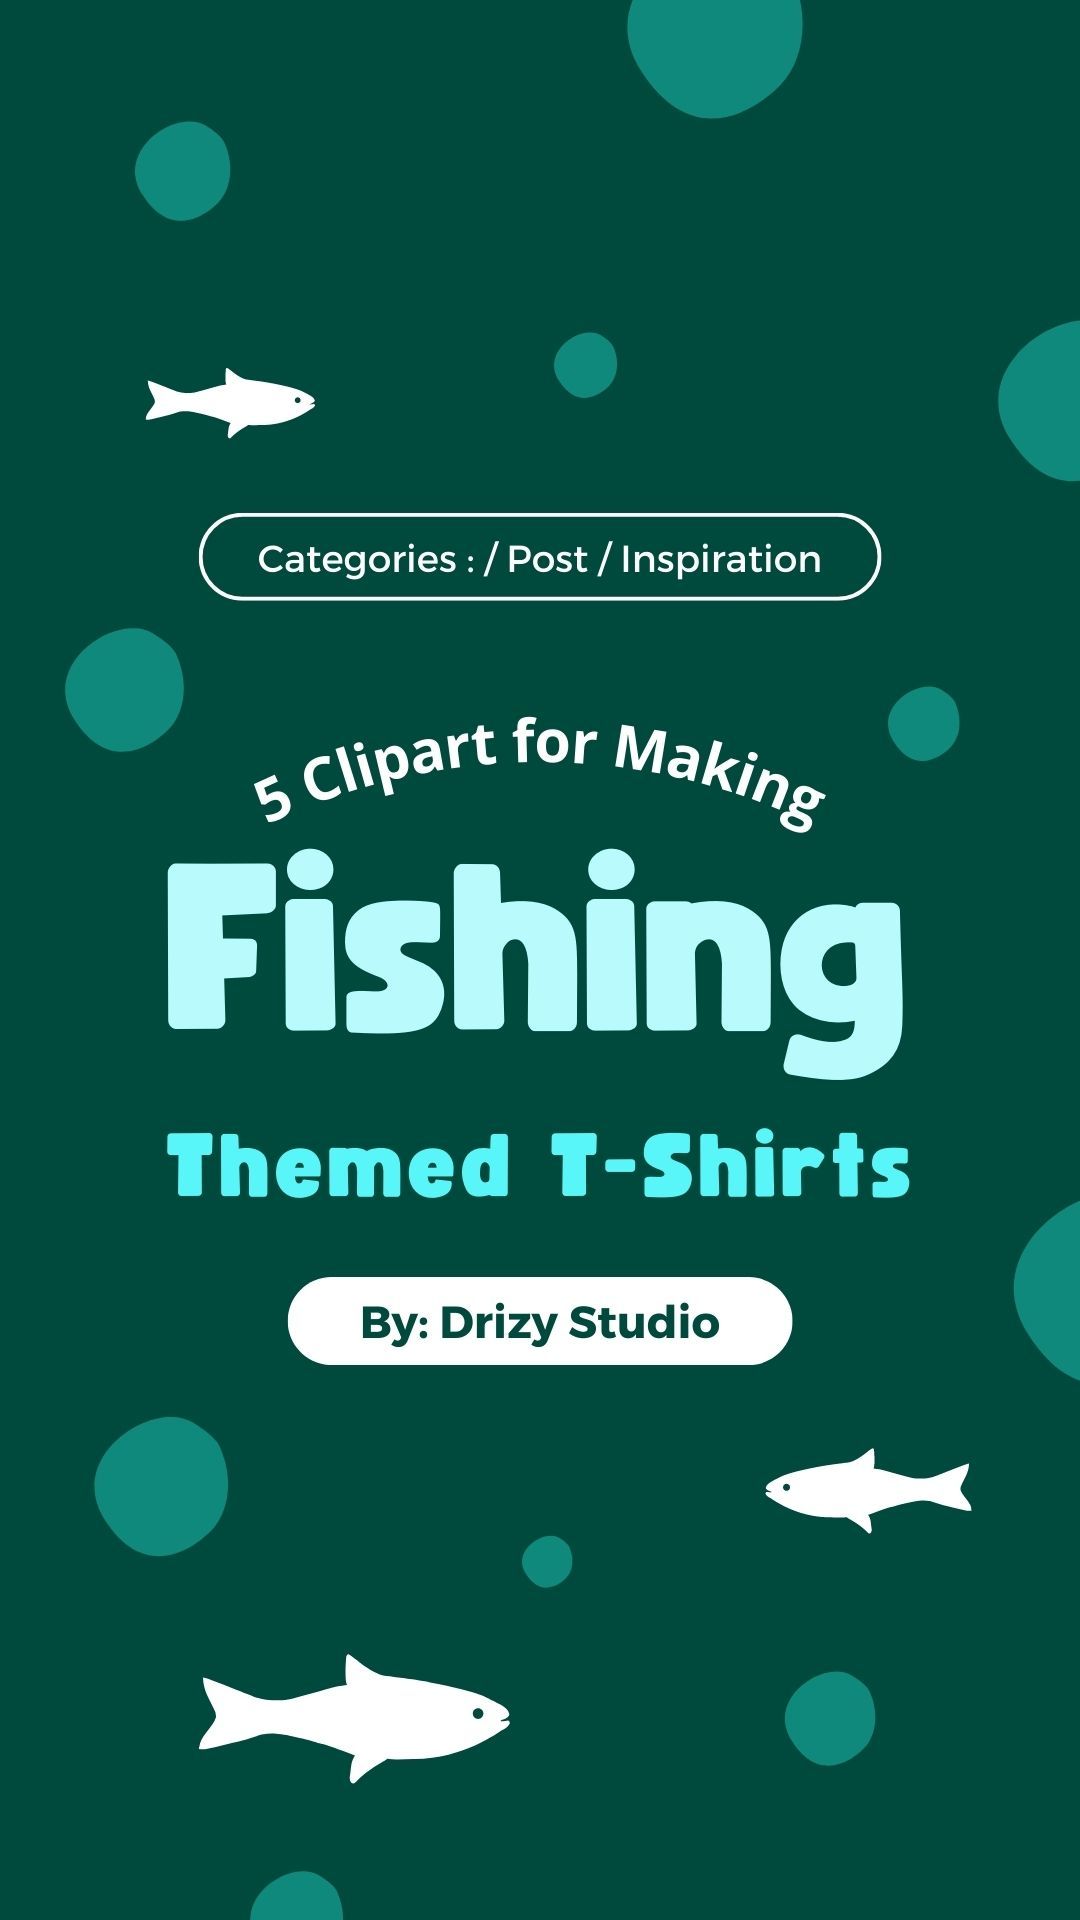 5 Best Clipart for Your Fishing T-shirt - Drizy Studio